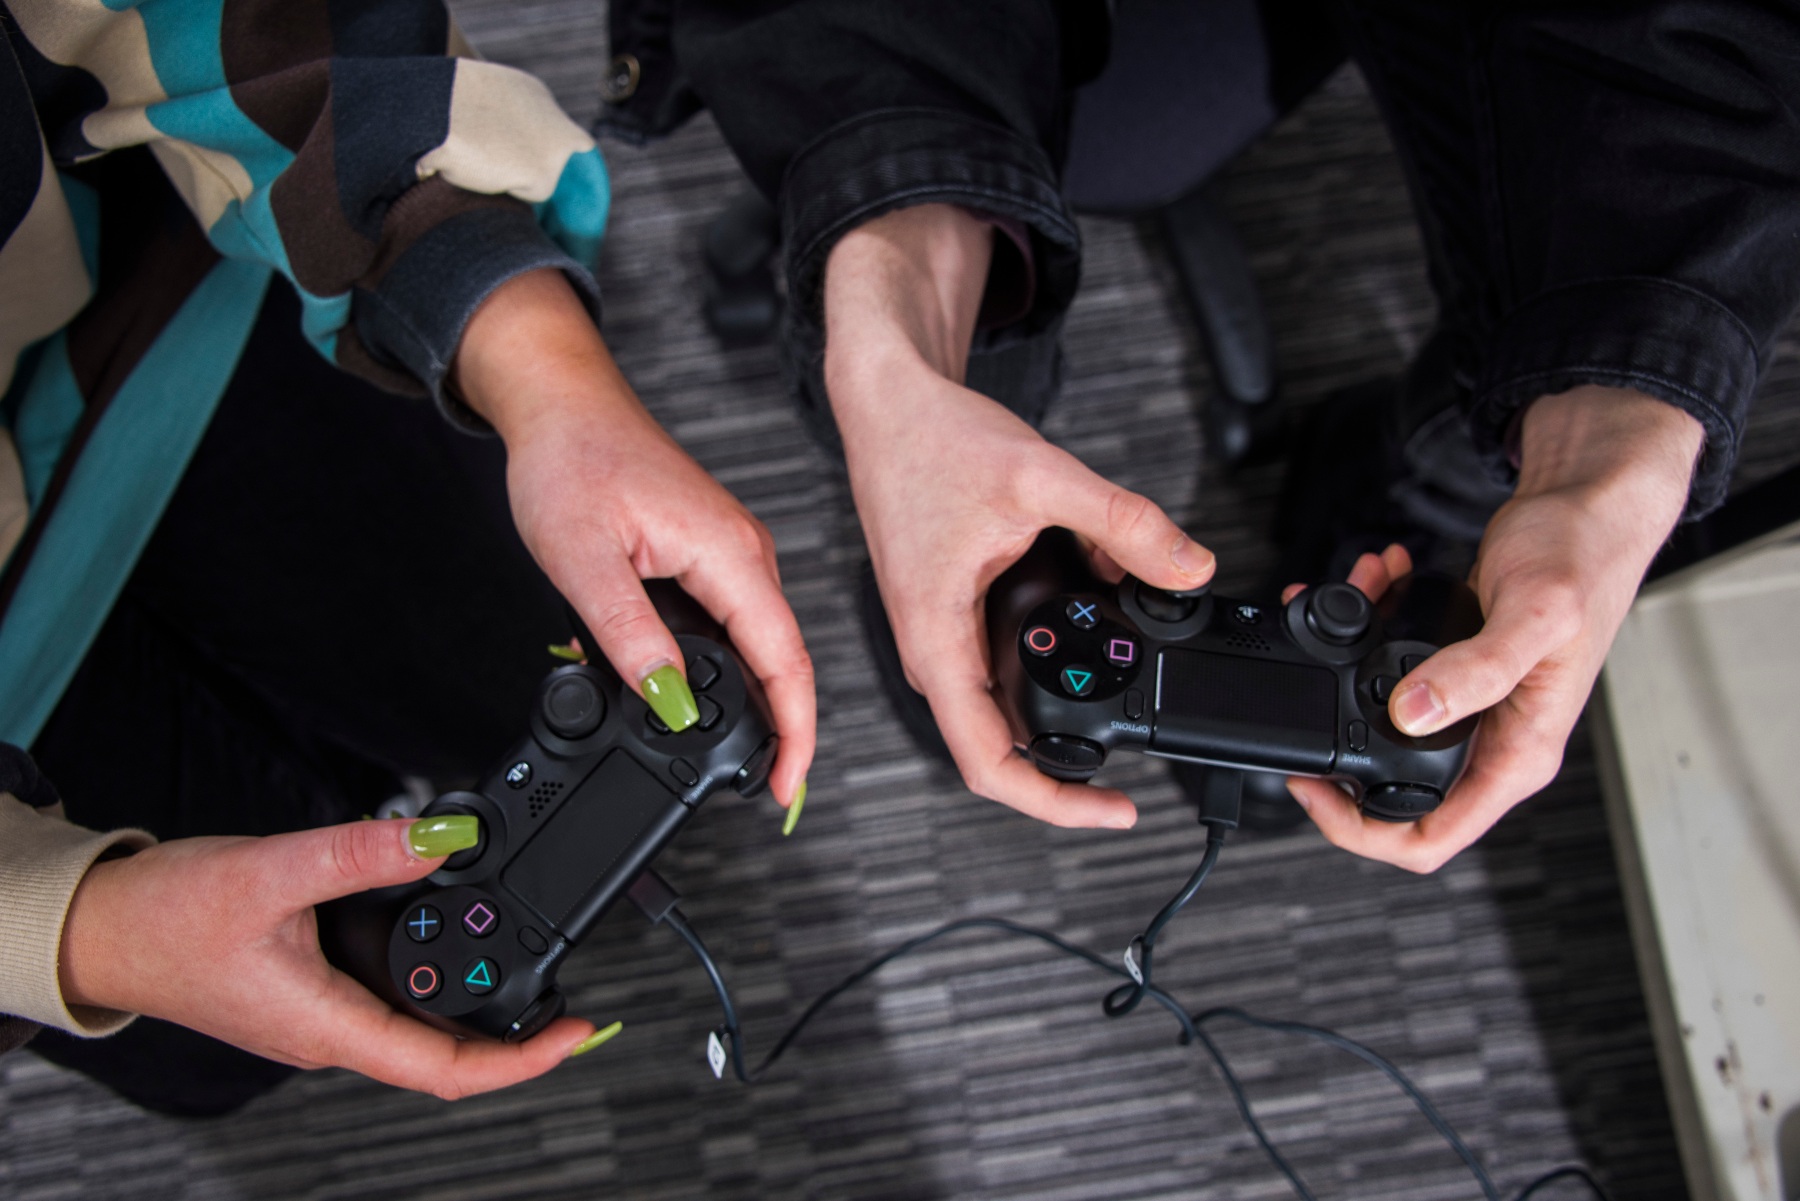 RNIB and Abertay University hold event to reboot gaming to make it more accessible for those with sight loss